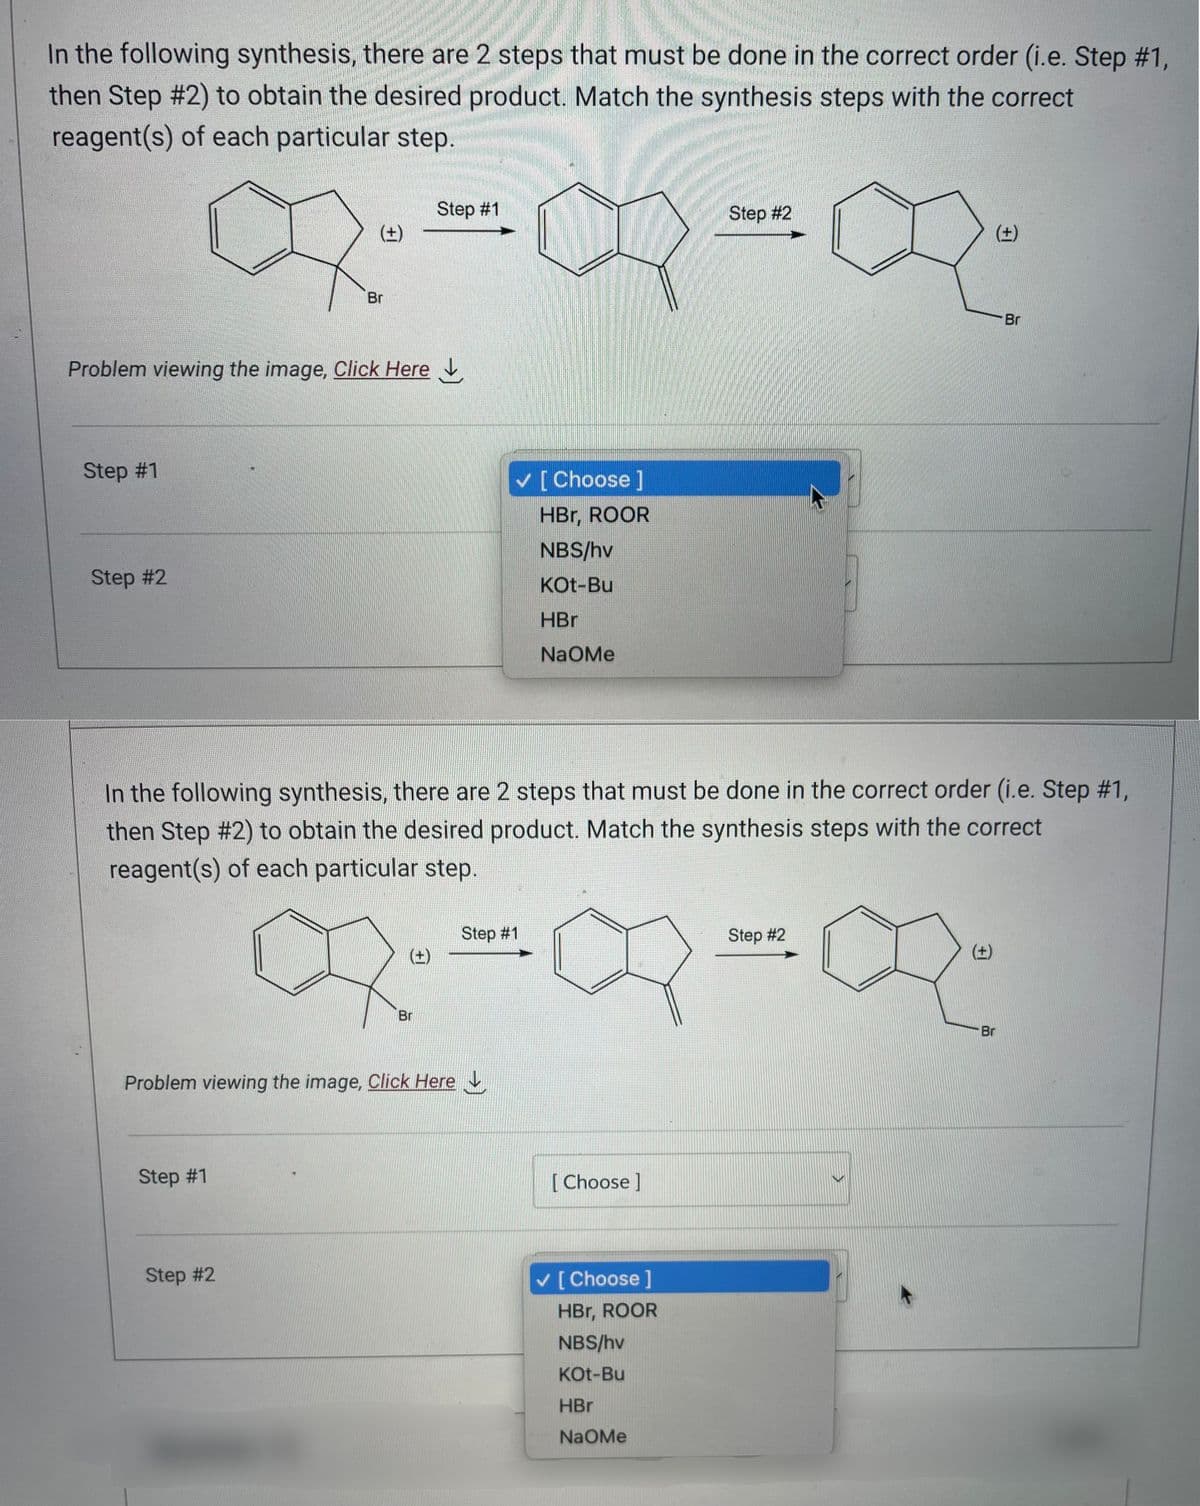 In the following synthesis, there are 2 steps that must be done in the correct order (i.e. Step #1,
then Step #2) to obtain the desired product. Match the synthesis steps with the correct
reagent(s) of each particular step.
Step #1
Step #1
BIBIR
Step #2
Problem viewing the image, Click Here
(±)
Br
Step #1
Step #2
In the following synthesis, there are 2 steps that must be done in the correct order (i.e. Step #1,
then Step #2) to obtain the desired product. Match the synthesis steps with the correct
reagent(s) of each particular step.
(±)
Problem viewing the image, Click Here
Br
[Choose ]
HBr, ROOR
NBS/hv
KOt-Bu
HBr
NAOMe
Step #1
Step #2
·X-2
Step #2
[Choose ]
✓ [Choose ]
HBr, ROOR
NBS/hv
KOt-Bu
HBr
NaOMe
(+)
Br
Br